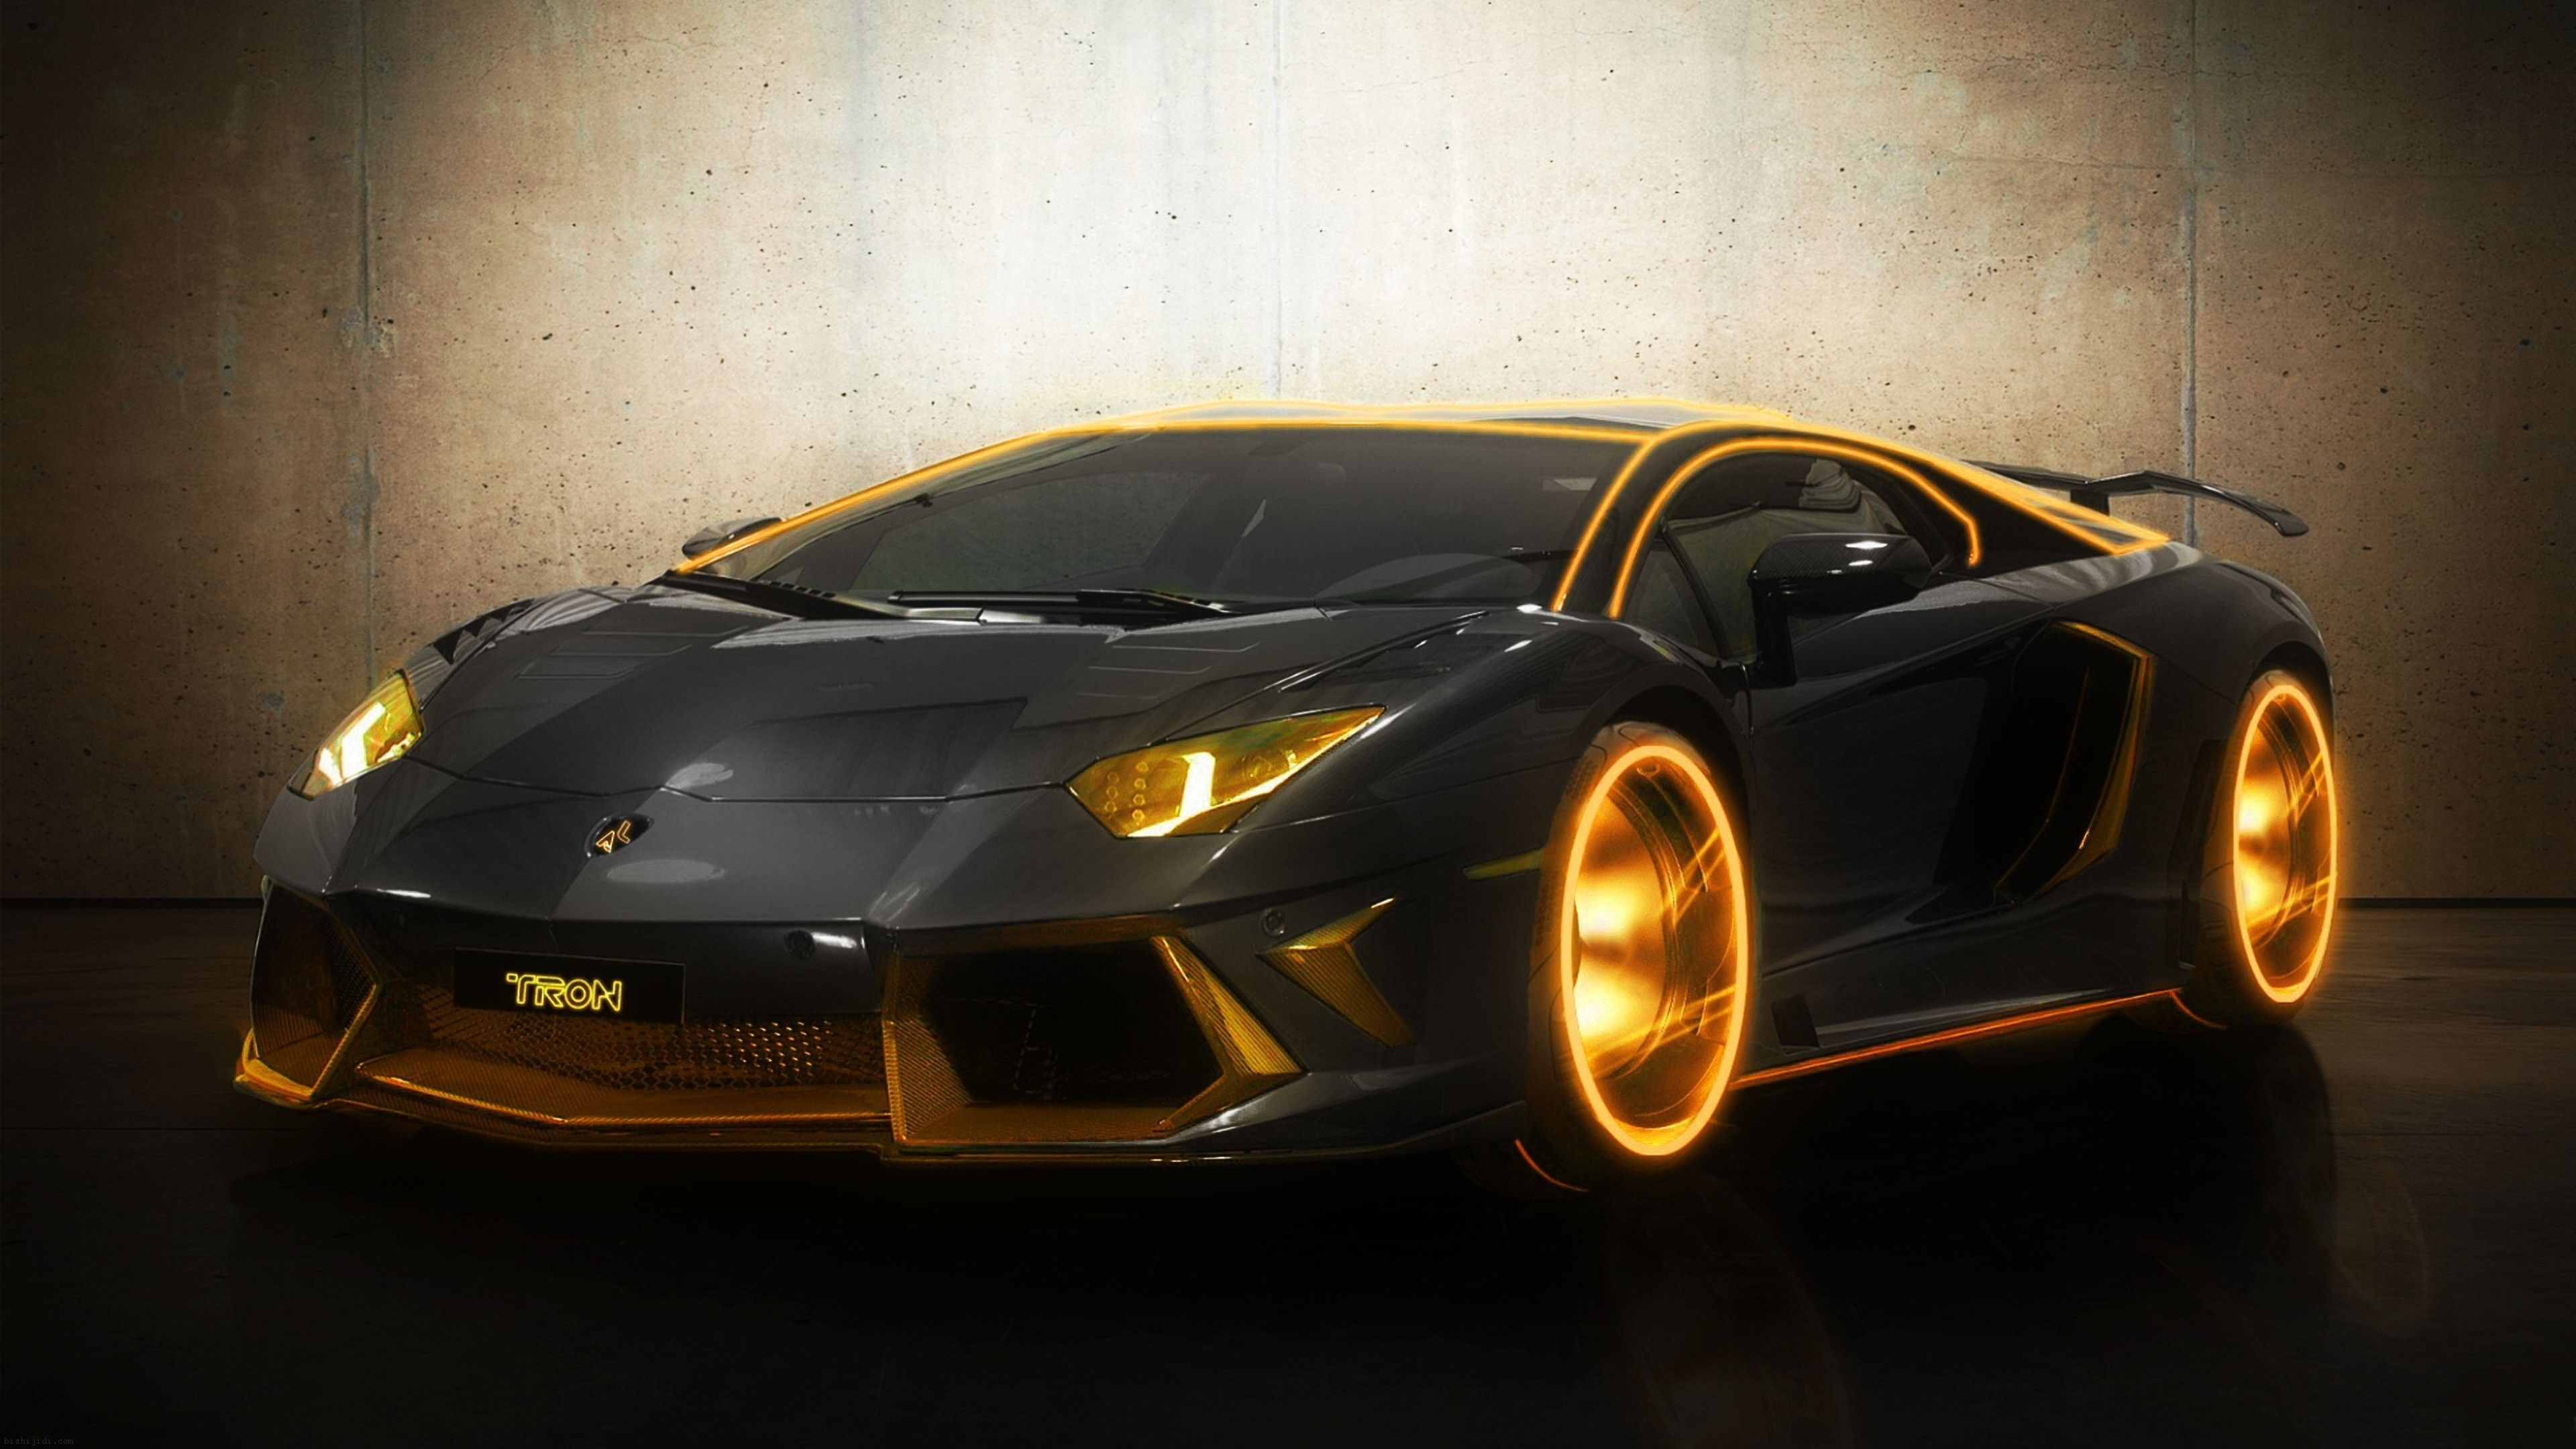 Supreme Cars Wallpapers - Top Free Supreme Cars Backgrounds -  WallpaperAccess